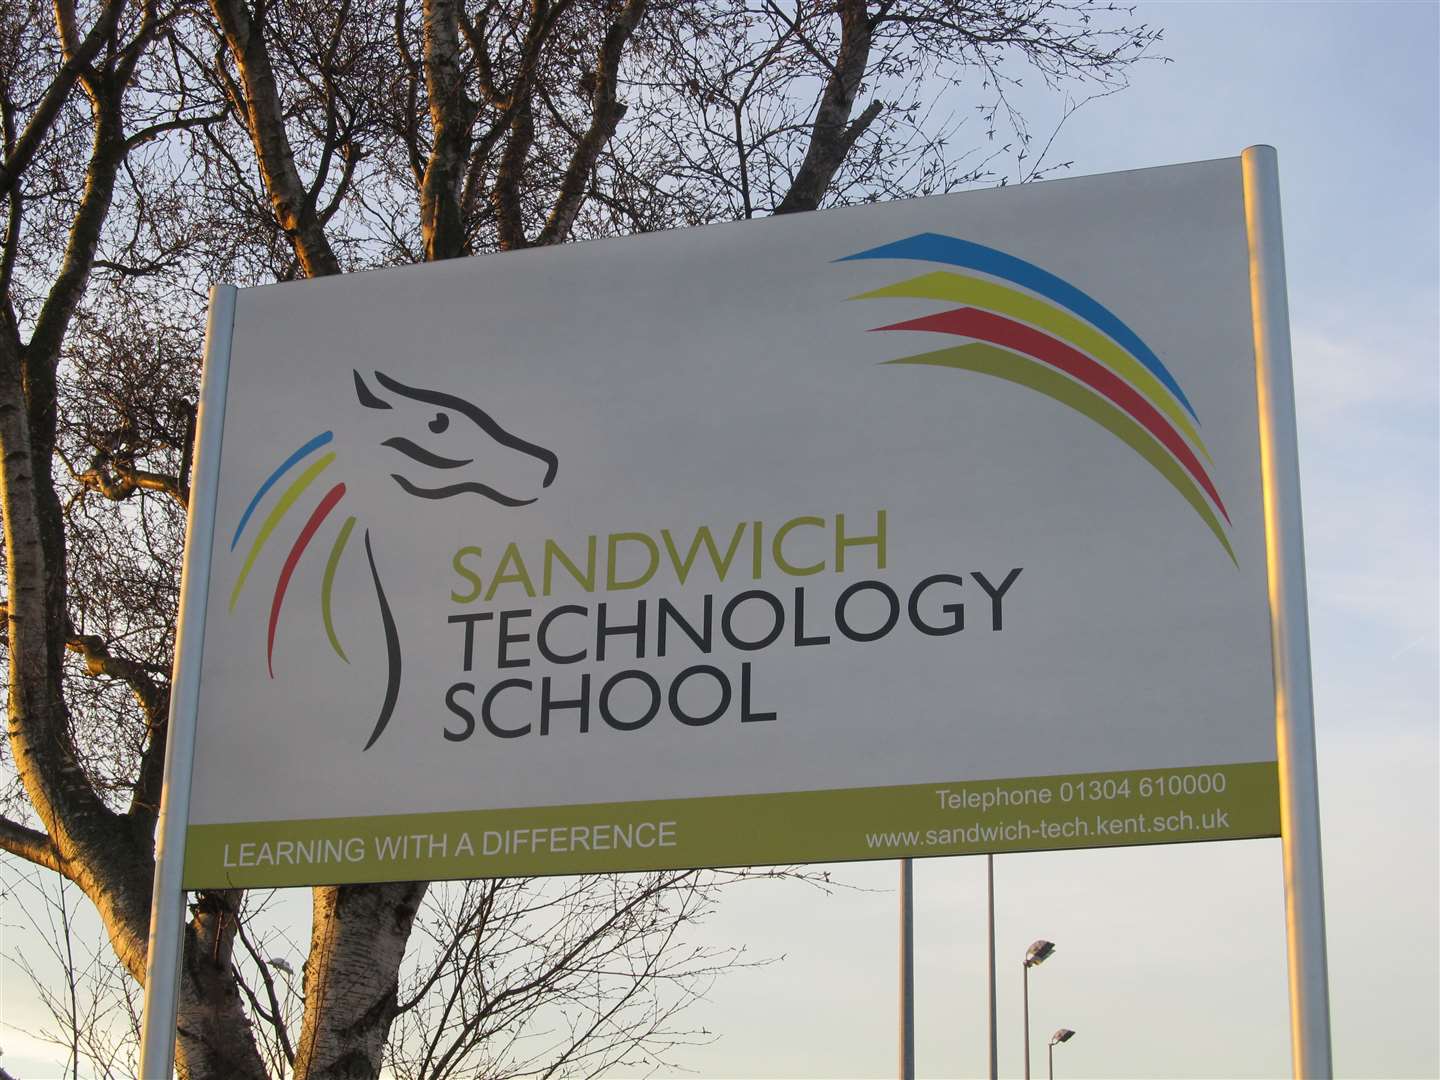 Sandwich Technology School withdrew its financial support and use of the centre in March